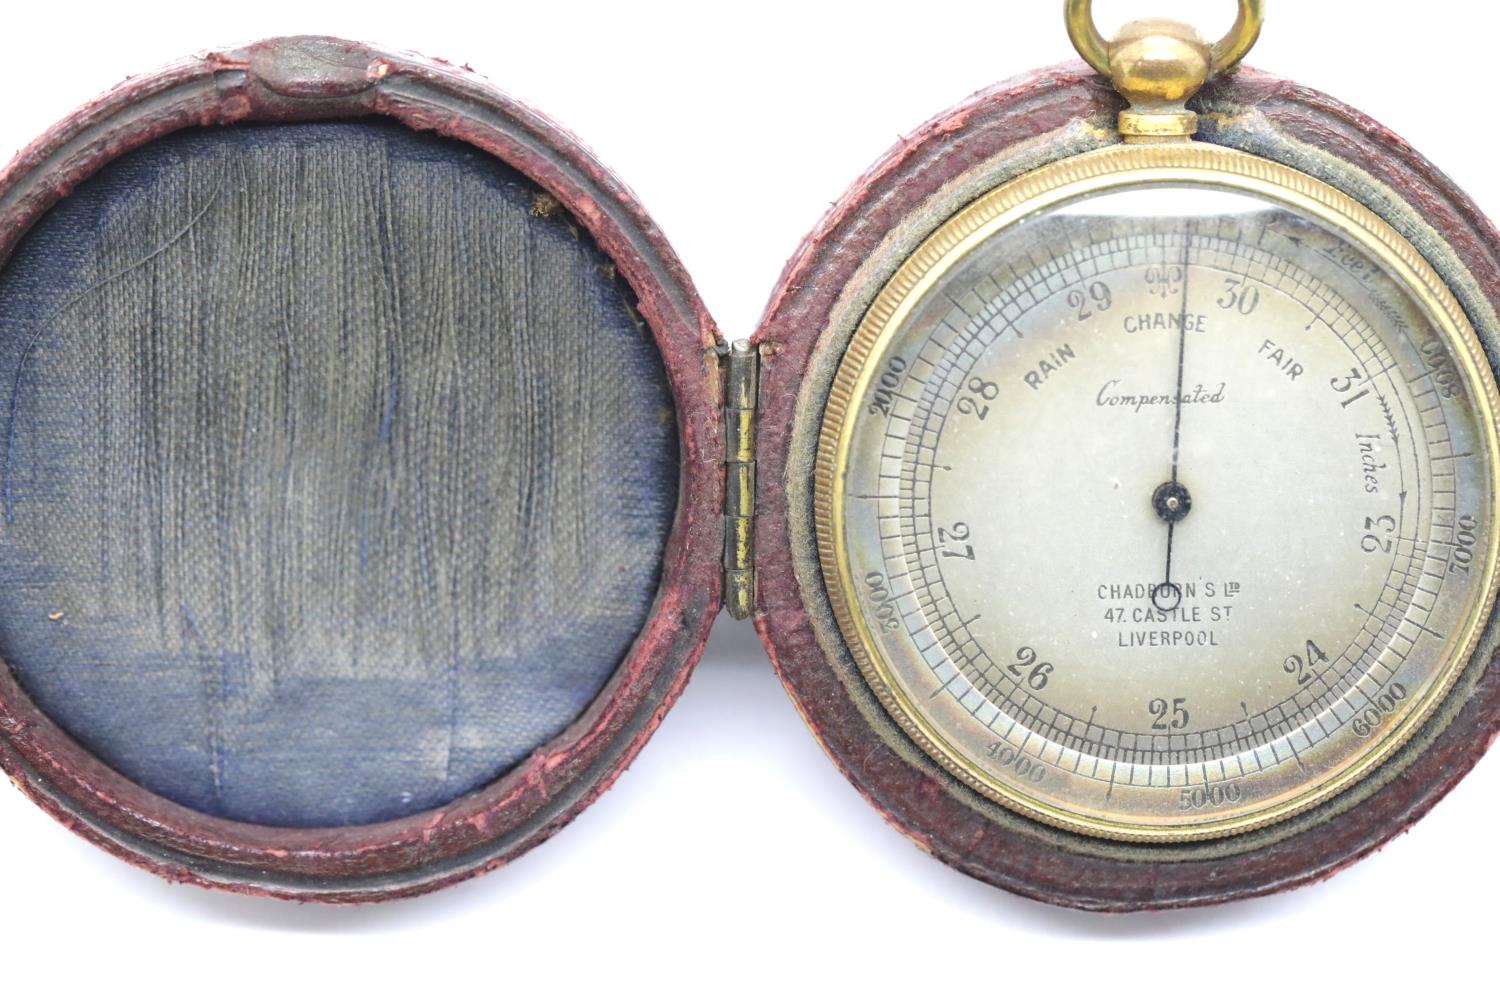 Chadburn's, Liverpool: a gilt brass cased compensated pocket barometer, D: 45 mm, with its